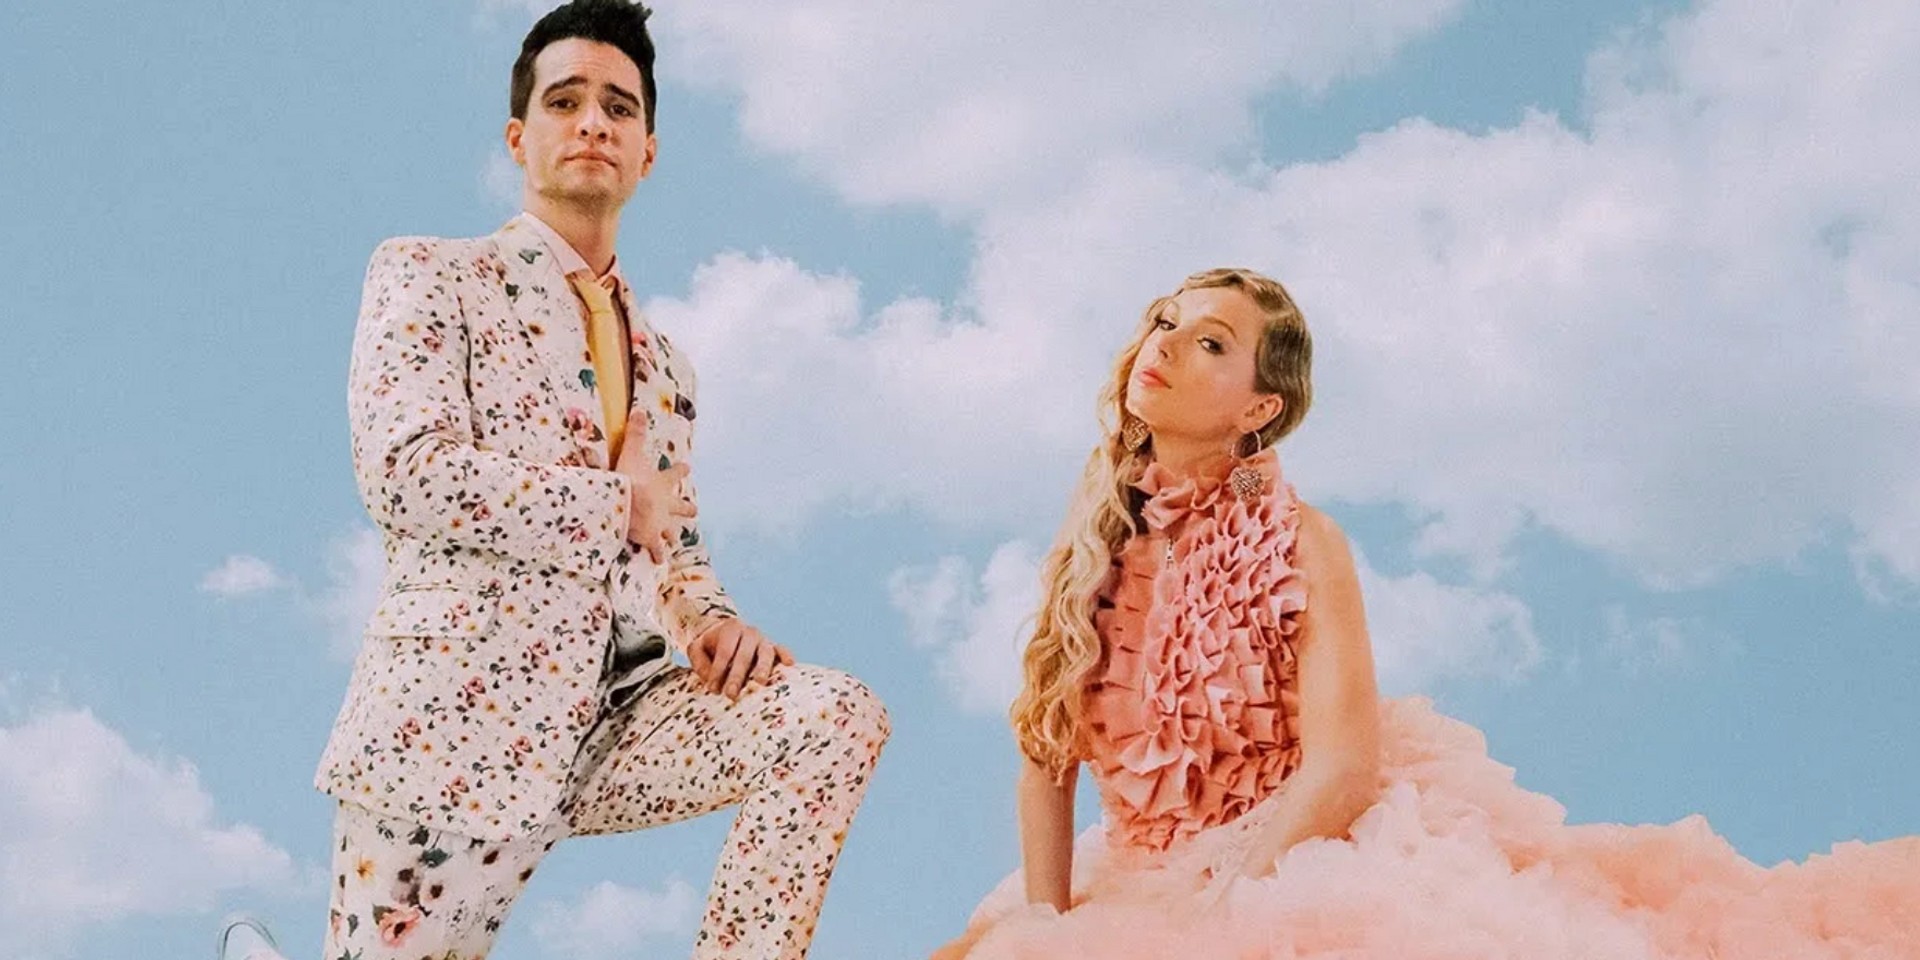 Taylor Swift premieres new single, 'ME!' with Brendon Urie – watch